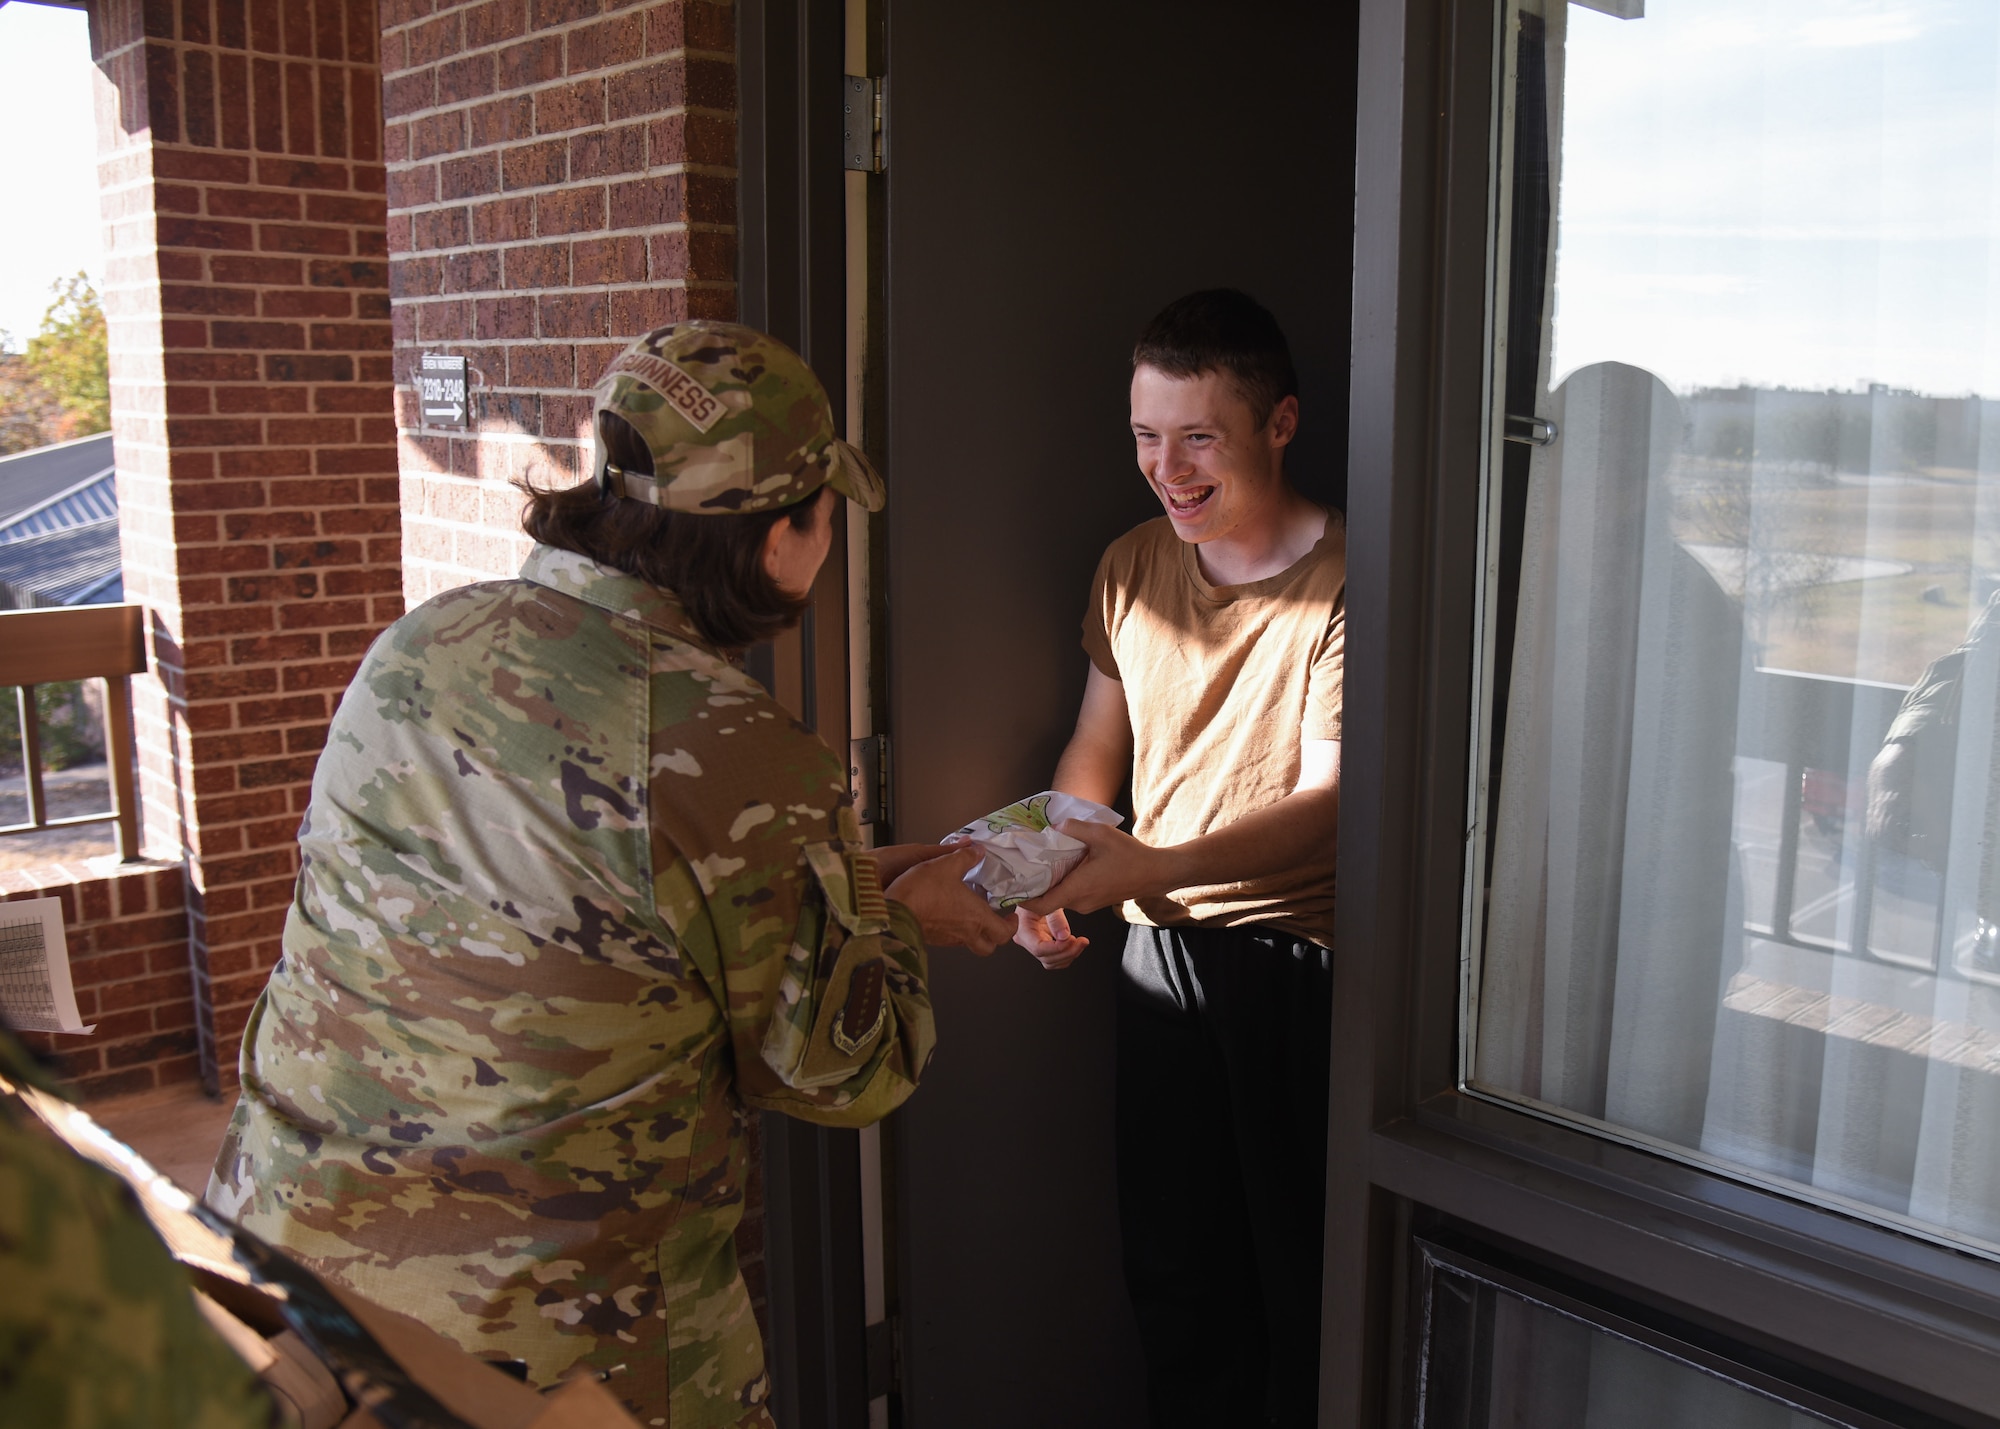 U.S. Air Force Col. Angelina Maguinness, 17t Training Group commander, hands a bag of cookies to a dorm resident during the Cookie Caper event, Dec. 10, 2021, on Goodfellow Air Force Base, Texas. This event is focused on delivering holiday cheer to students and permanent party residing in the dorms. (U.S. Air Force photo by Staff Sgt. Tyrell Hall)